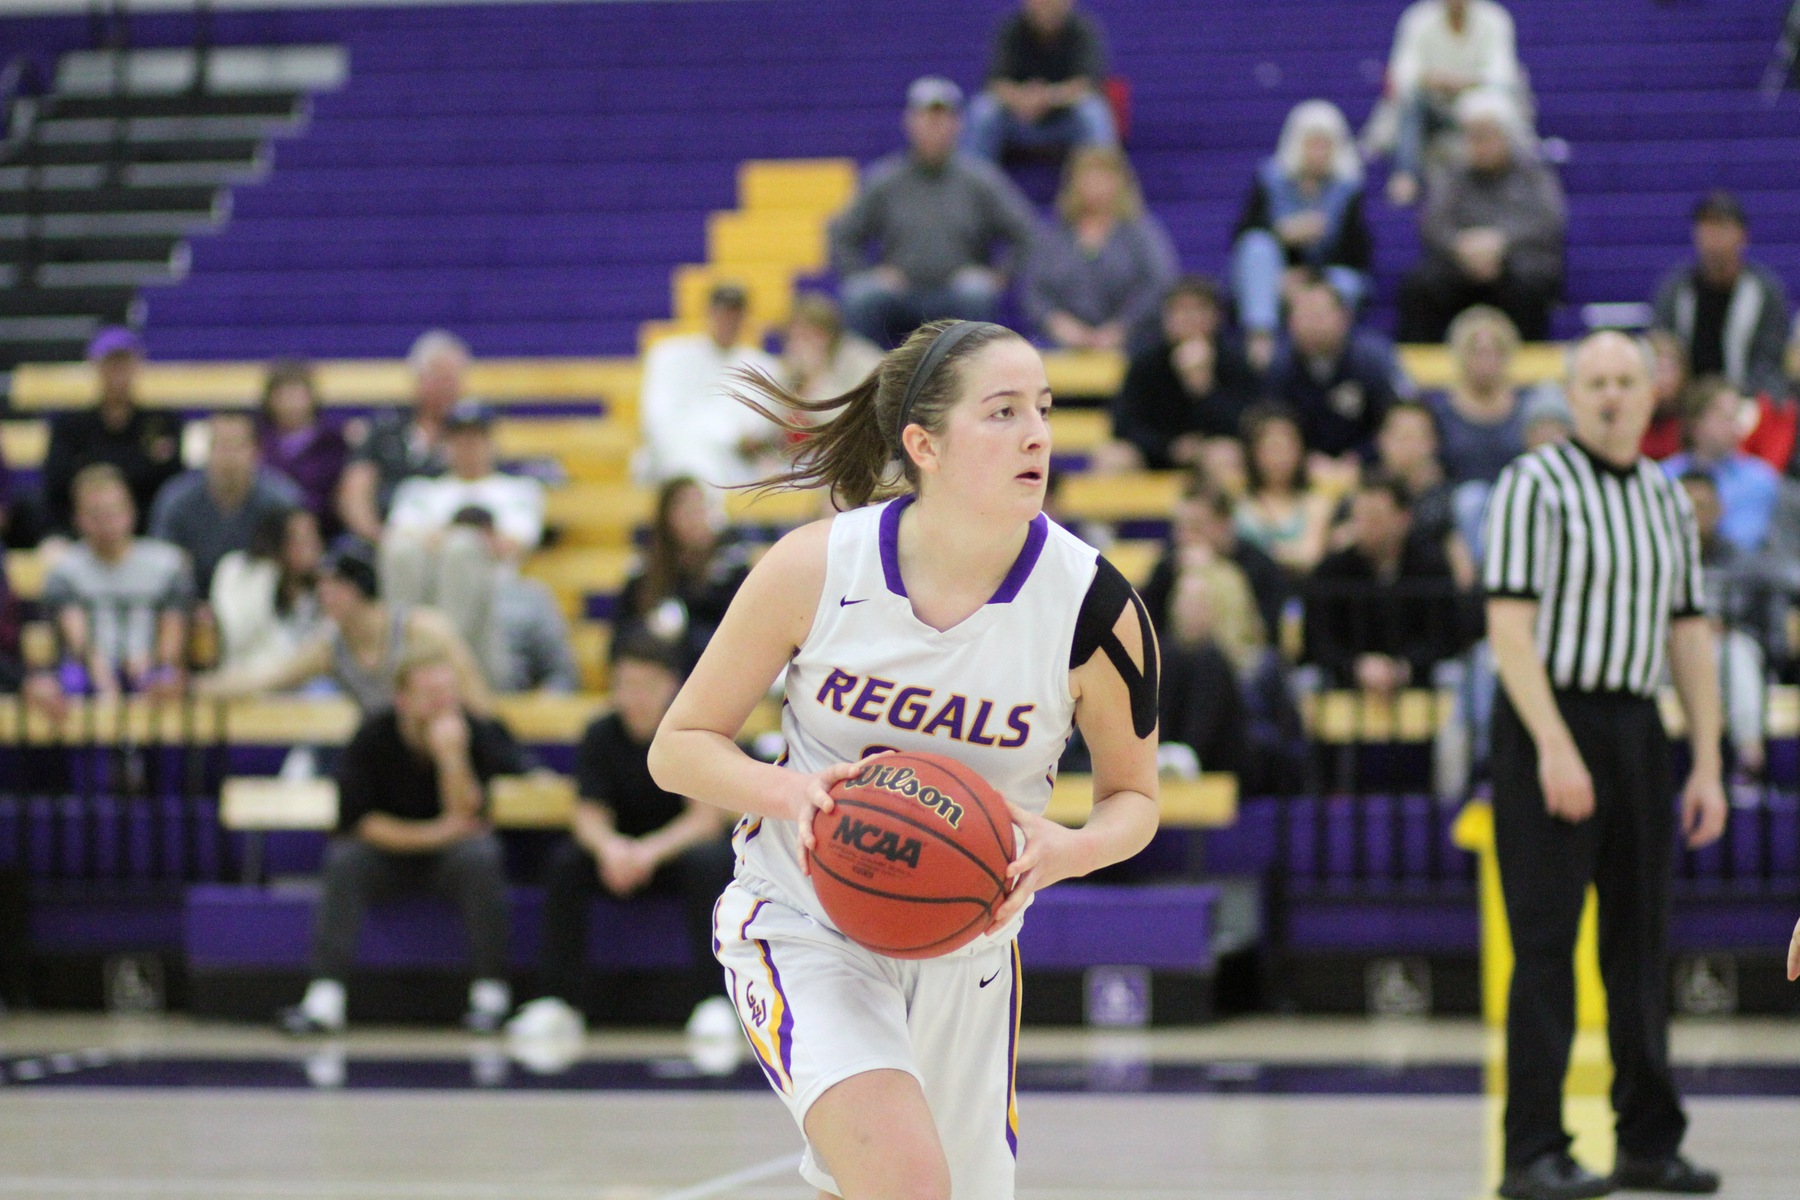 Regals fall to Mustangs